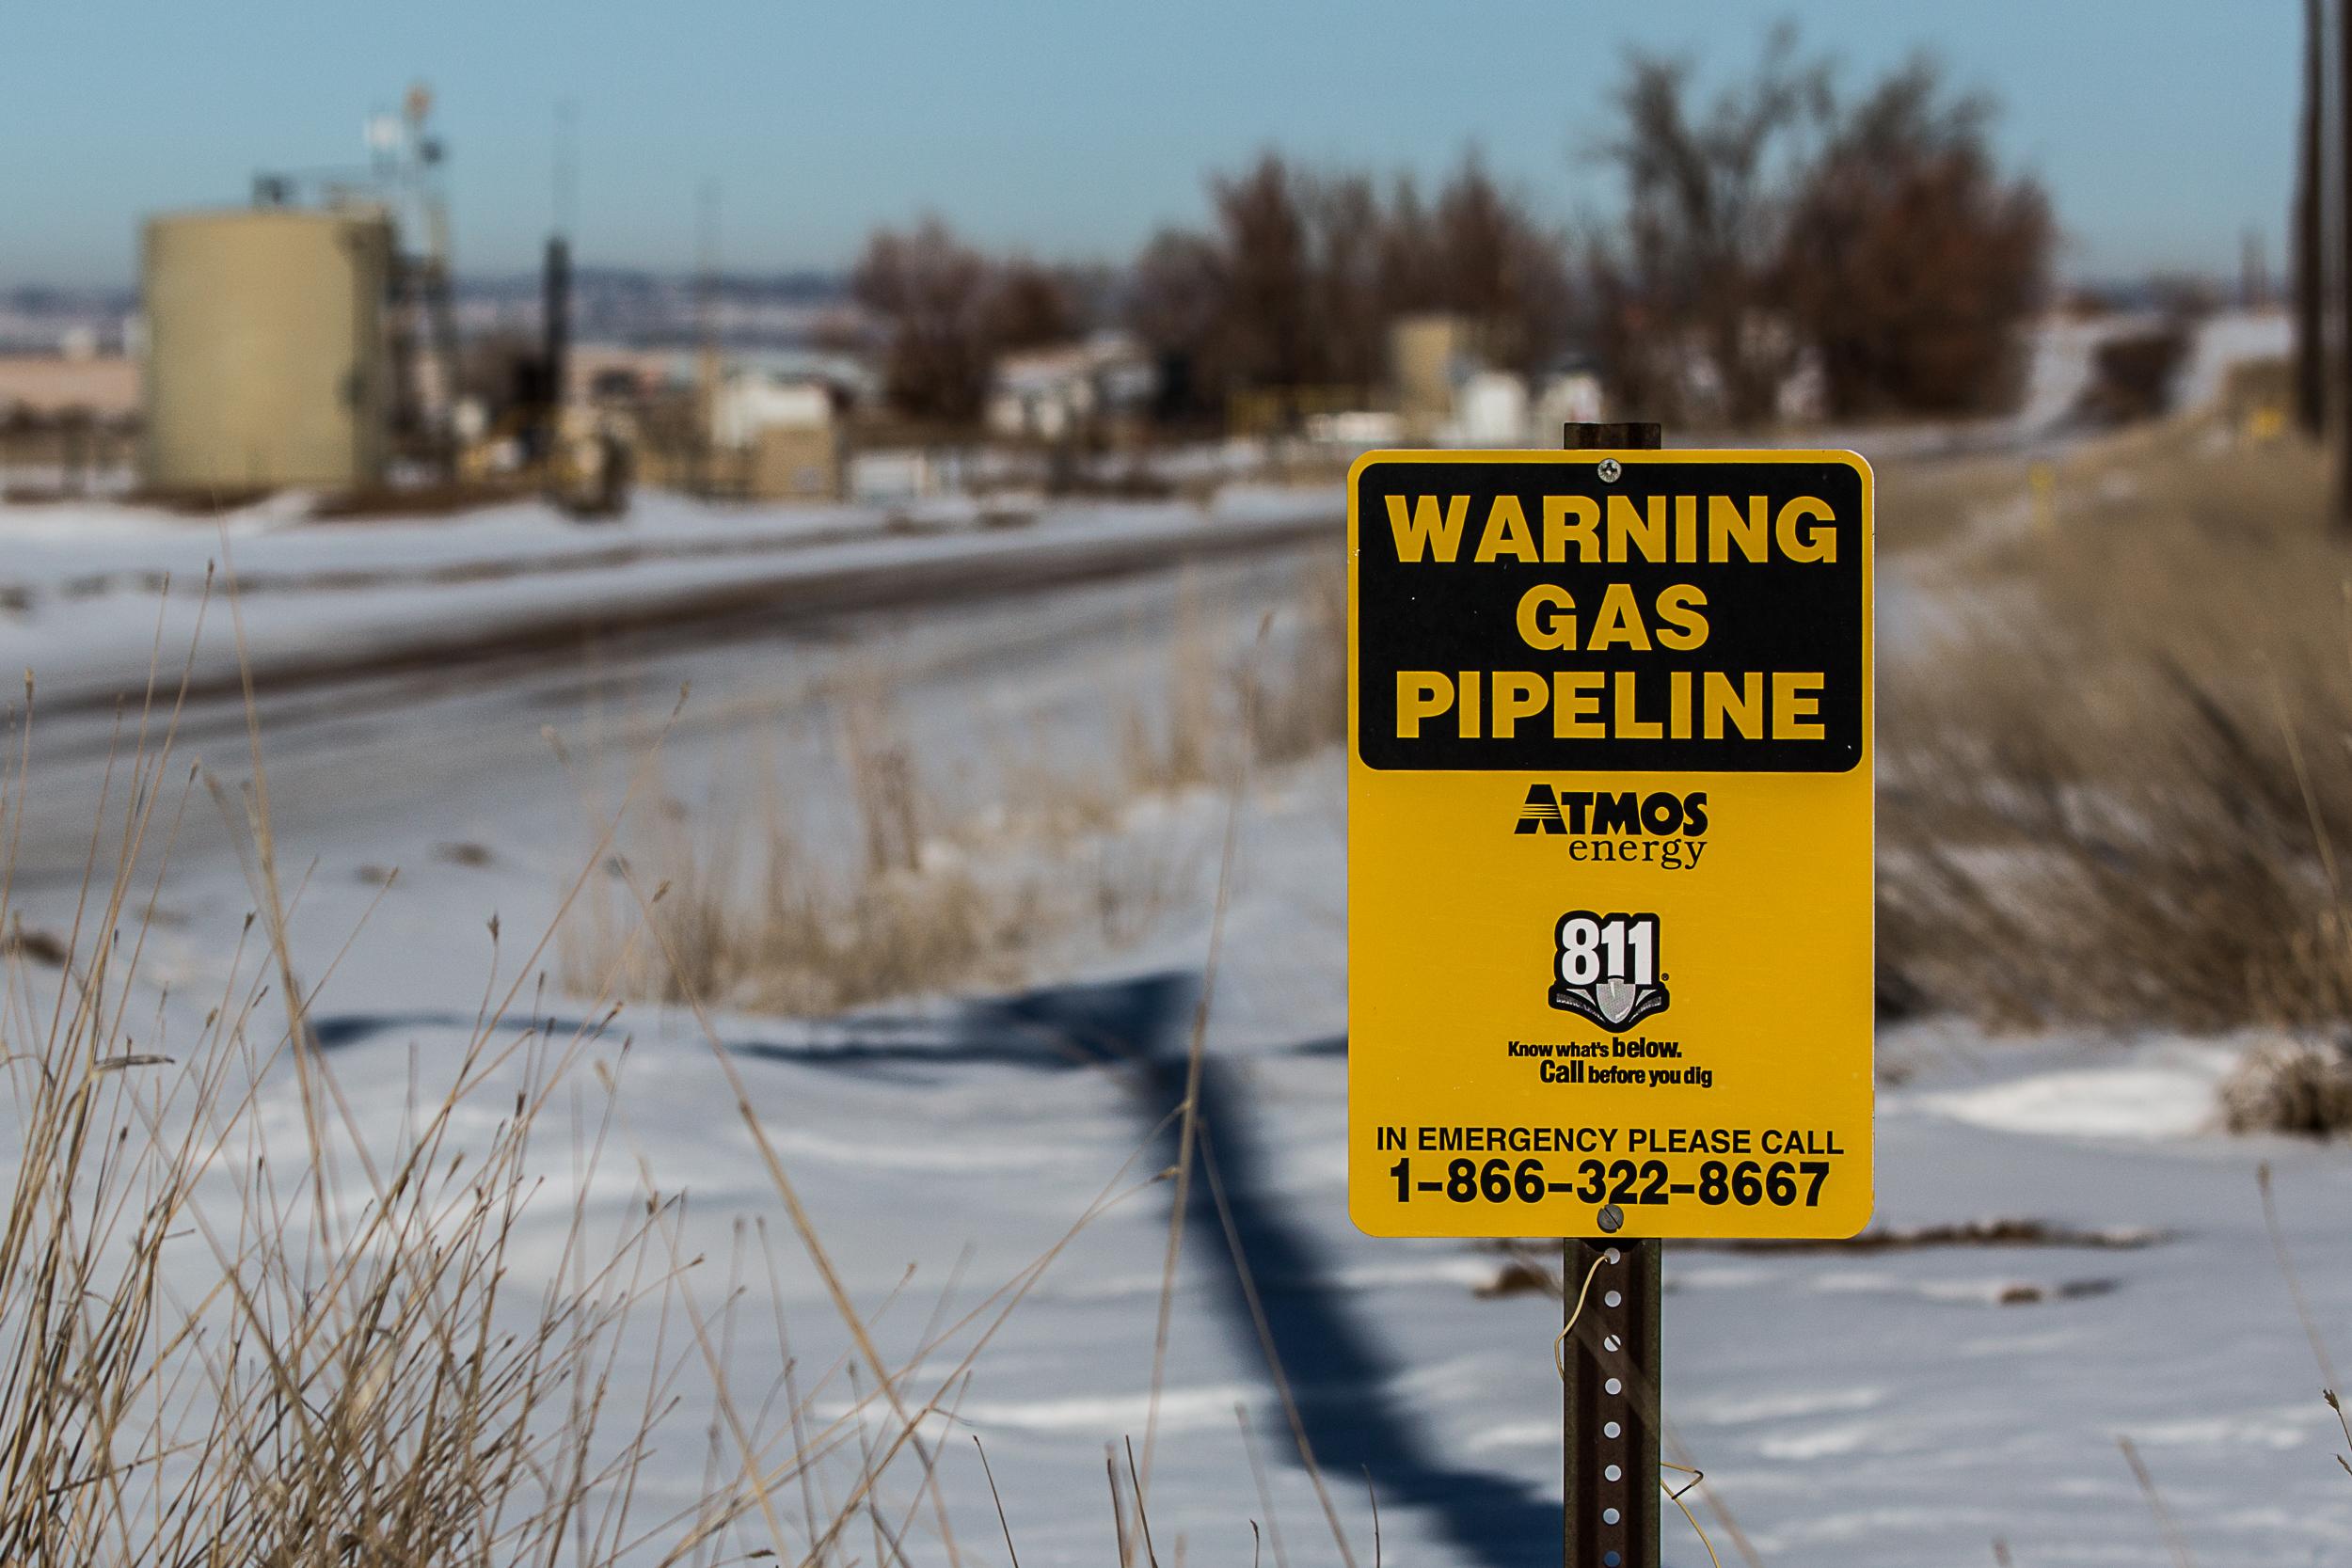 Natural gas pipeline warning signs in Weld County November 2019.